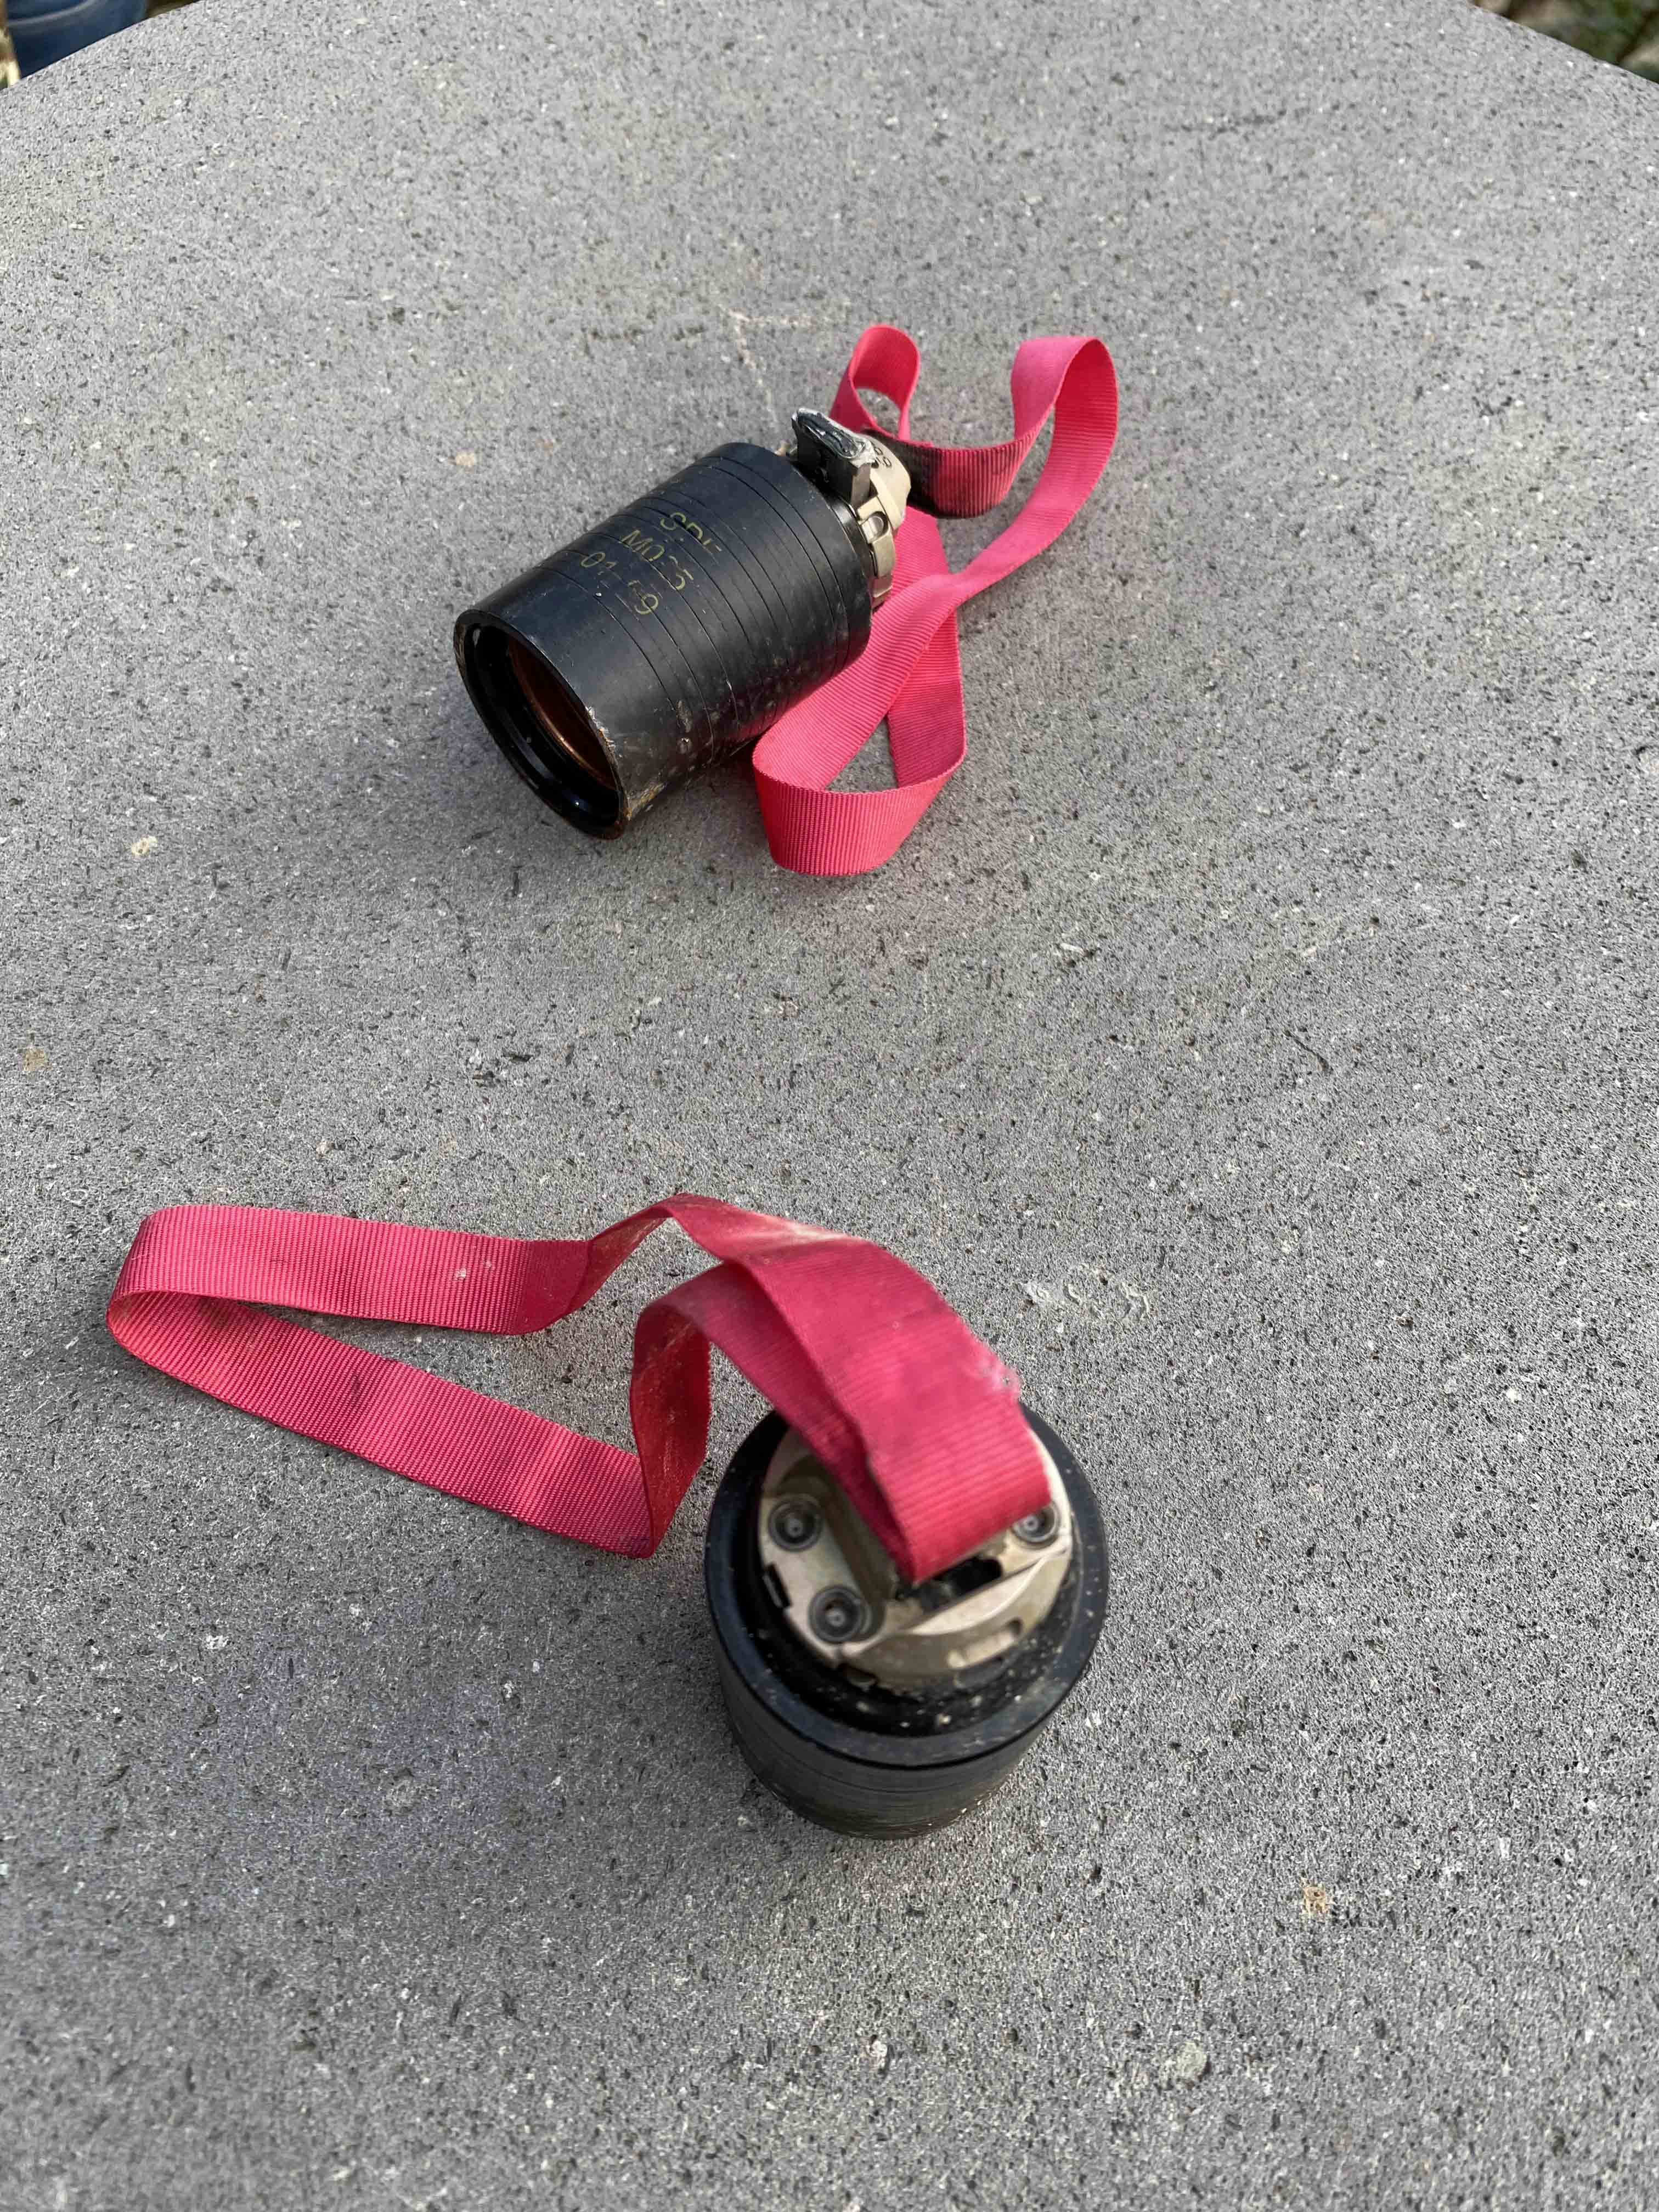 Two unexploded Israeli-made M095 submunitions, one of which is armed, in a residential area in the town of Hadrut following an attack on the city (Human Rights Watch/ Union of Informed Citizens)